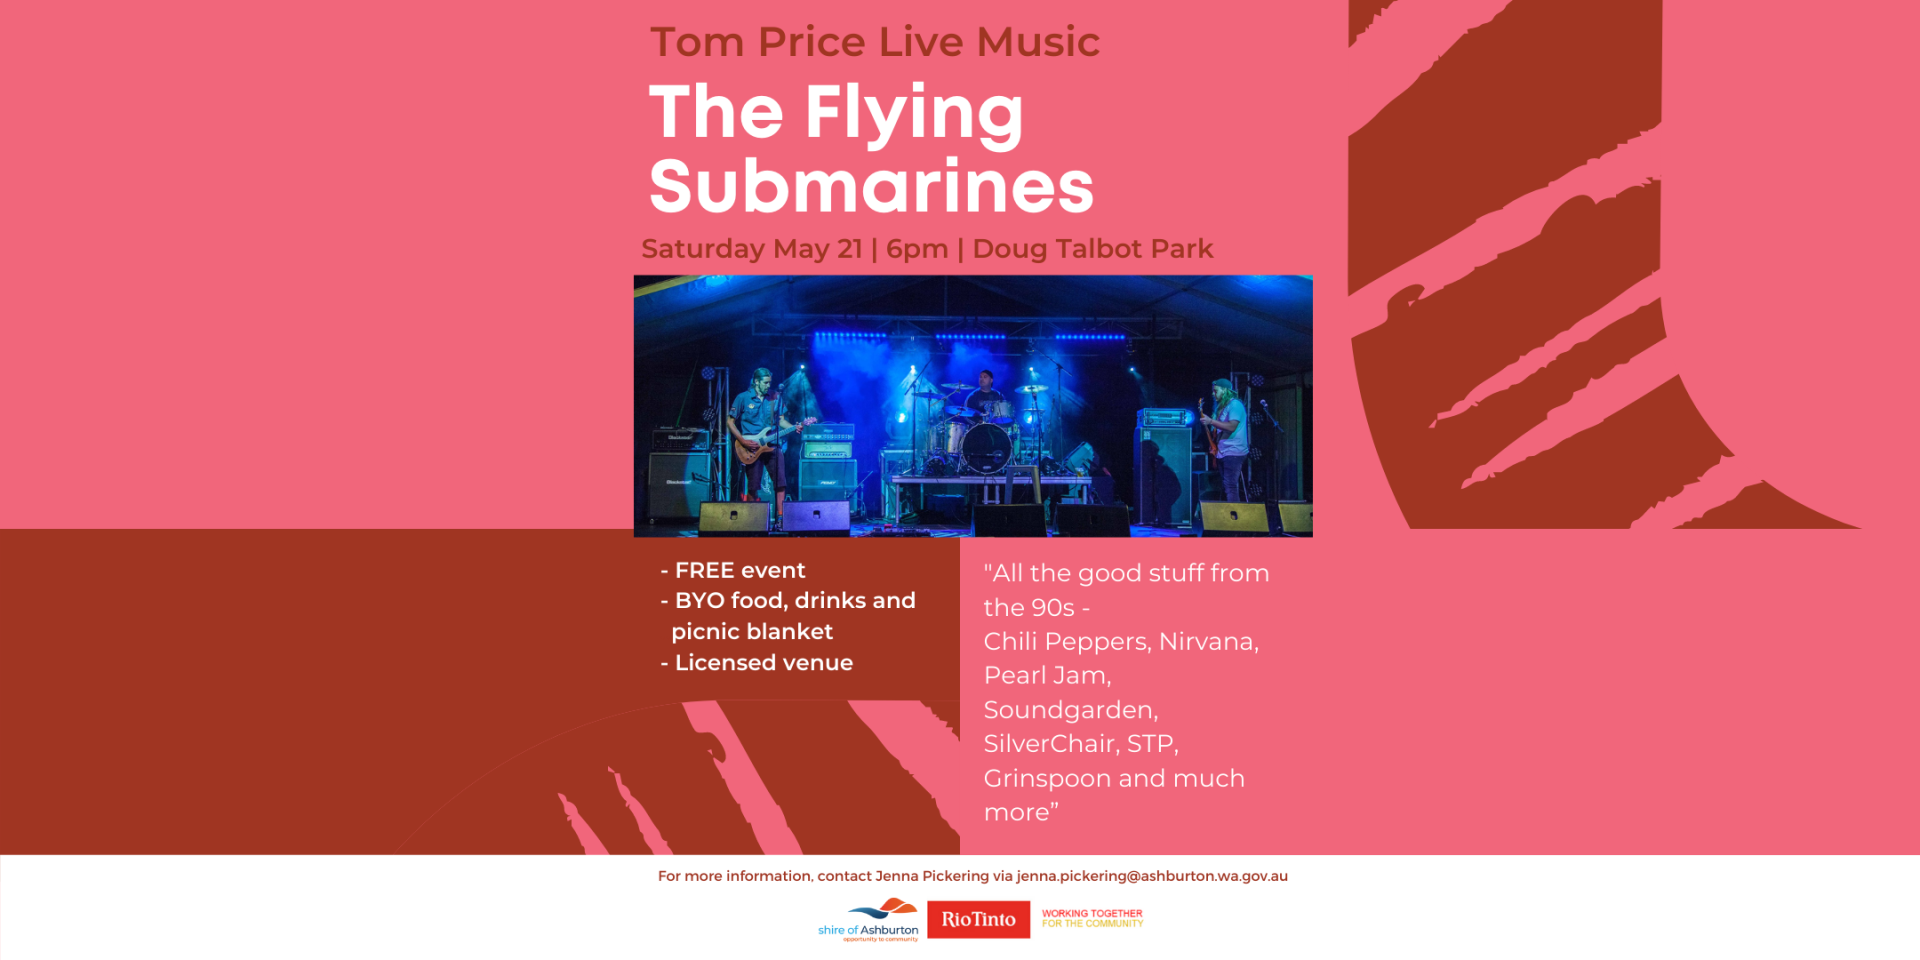 The Flying Submarines - Tom Price